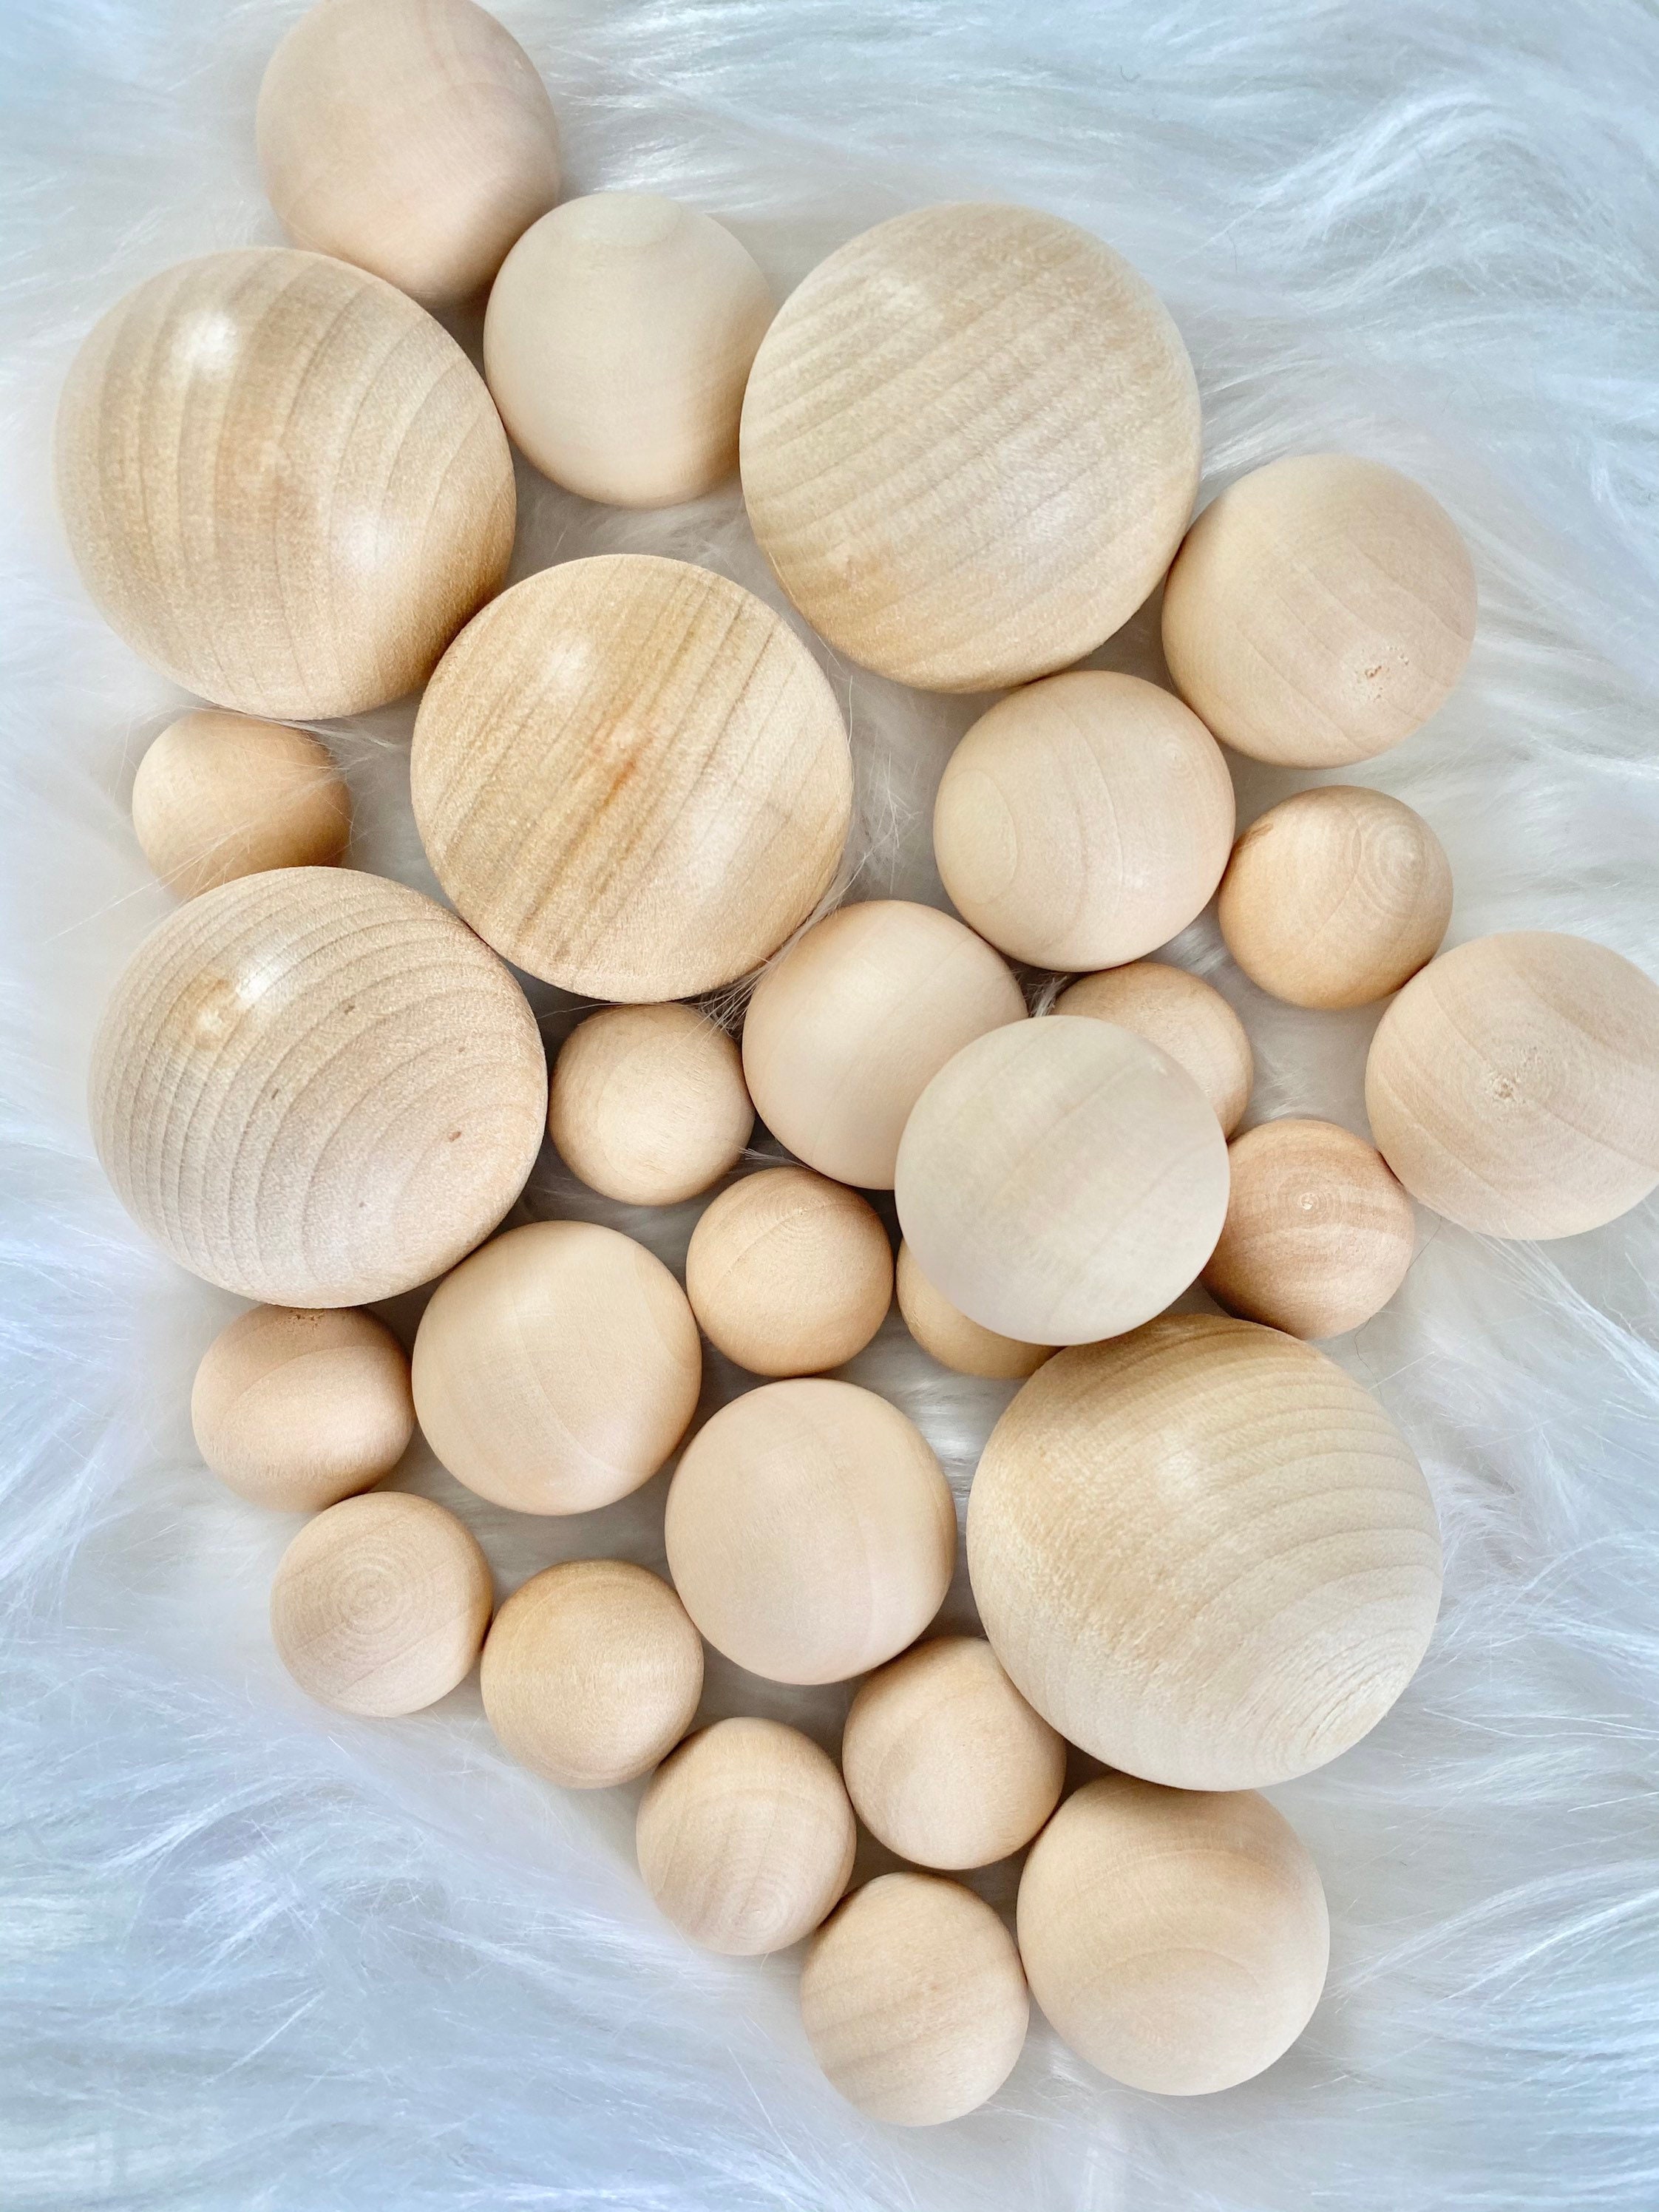 Wholesale Natural Wooden Round Ball 